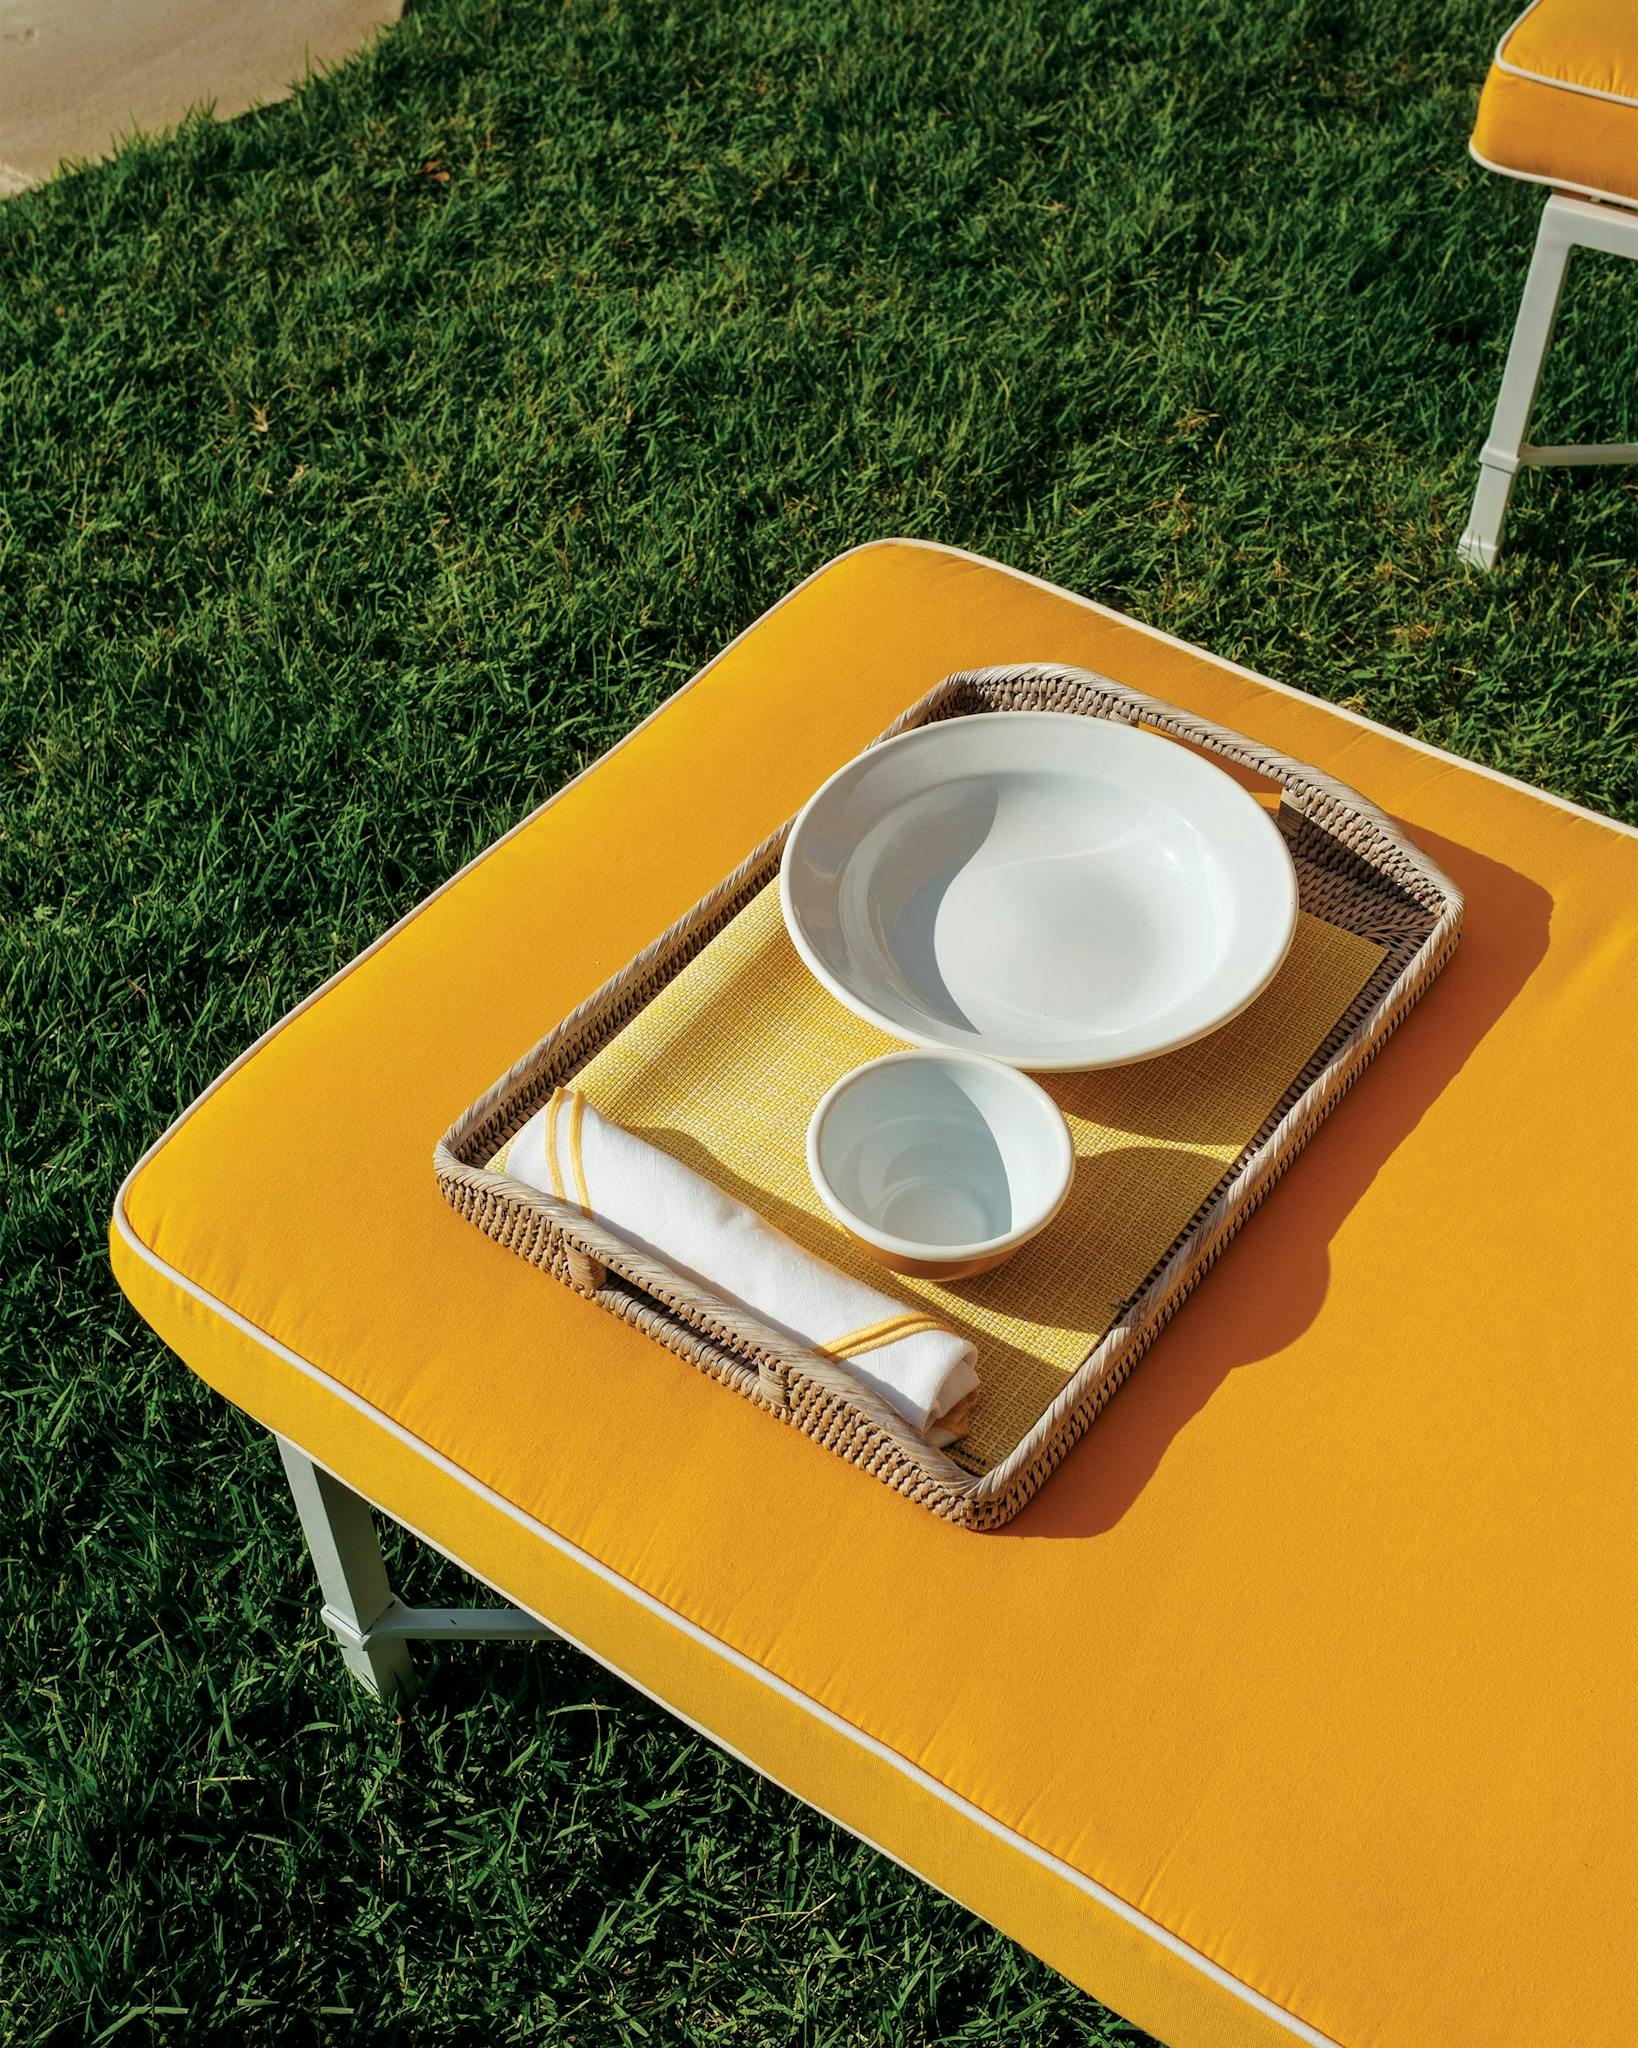 Tray with two dishes and silverware atop a yellow table.